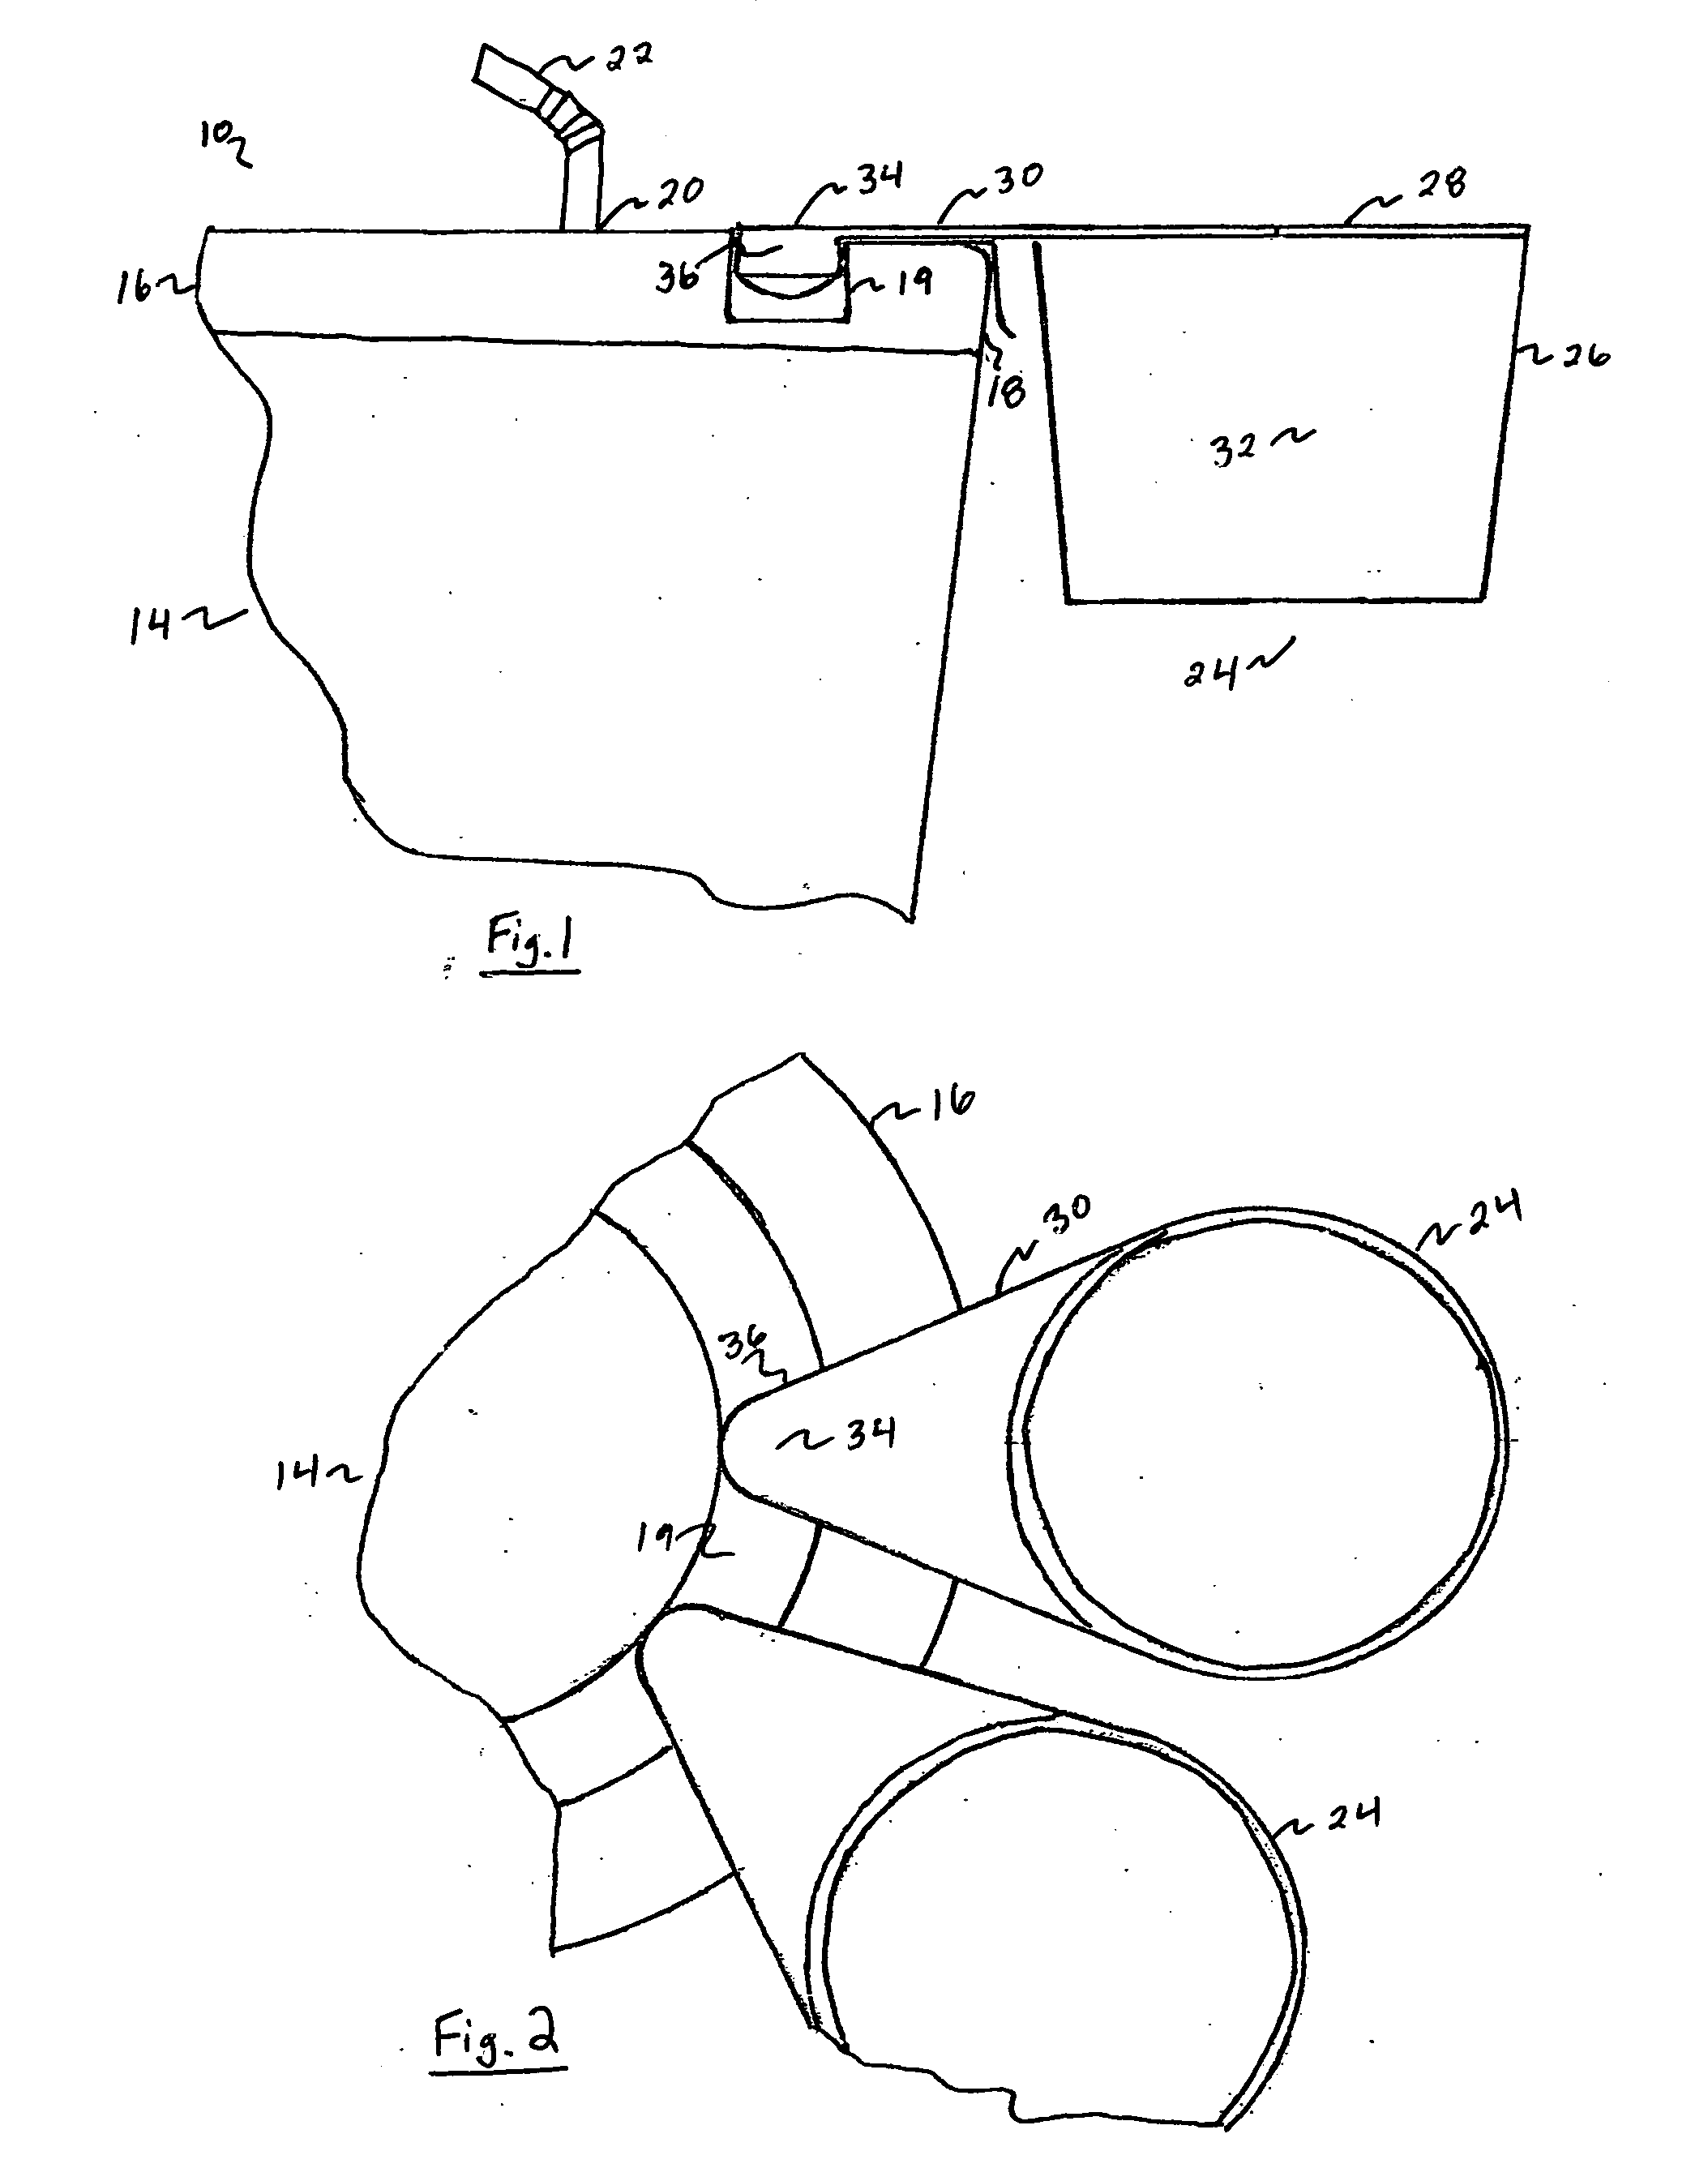 Attachable condiment cup assembly